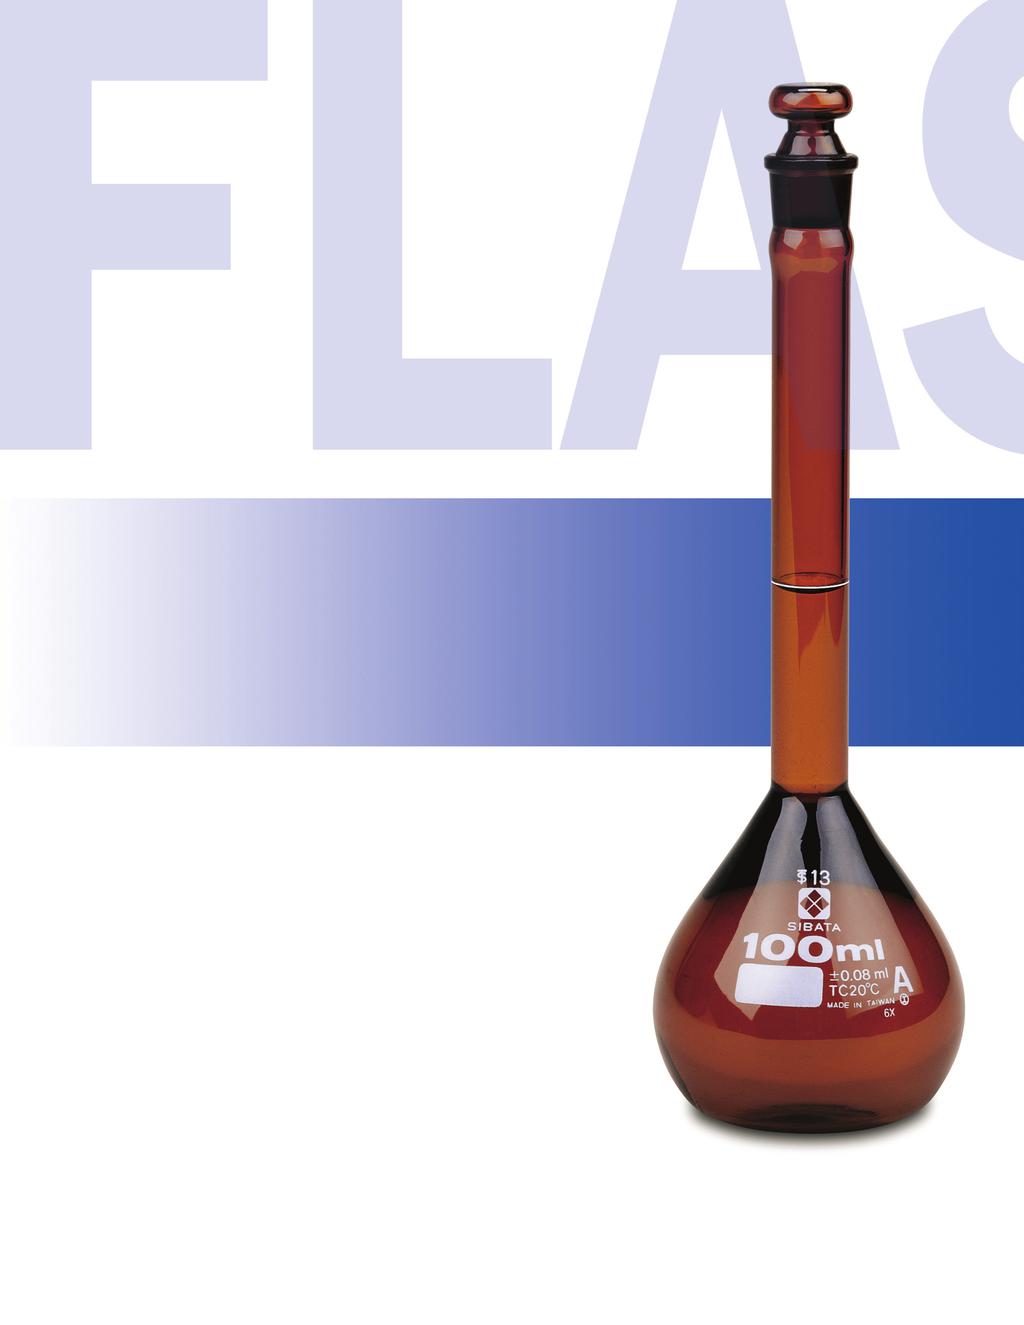 Volumetric Flasks Class A, Low-Actinic Amber, Stopper, To Contain SIBATA 307A-Series Low-Actinic Amber Volumetric Flasks meet ASTM E- Class A & USP Standards for Volumetric Glassware.